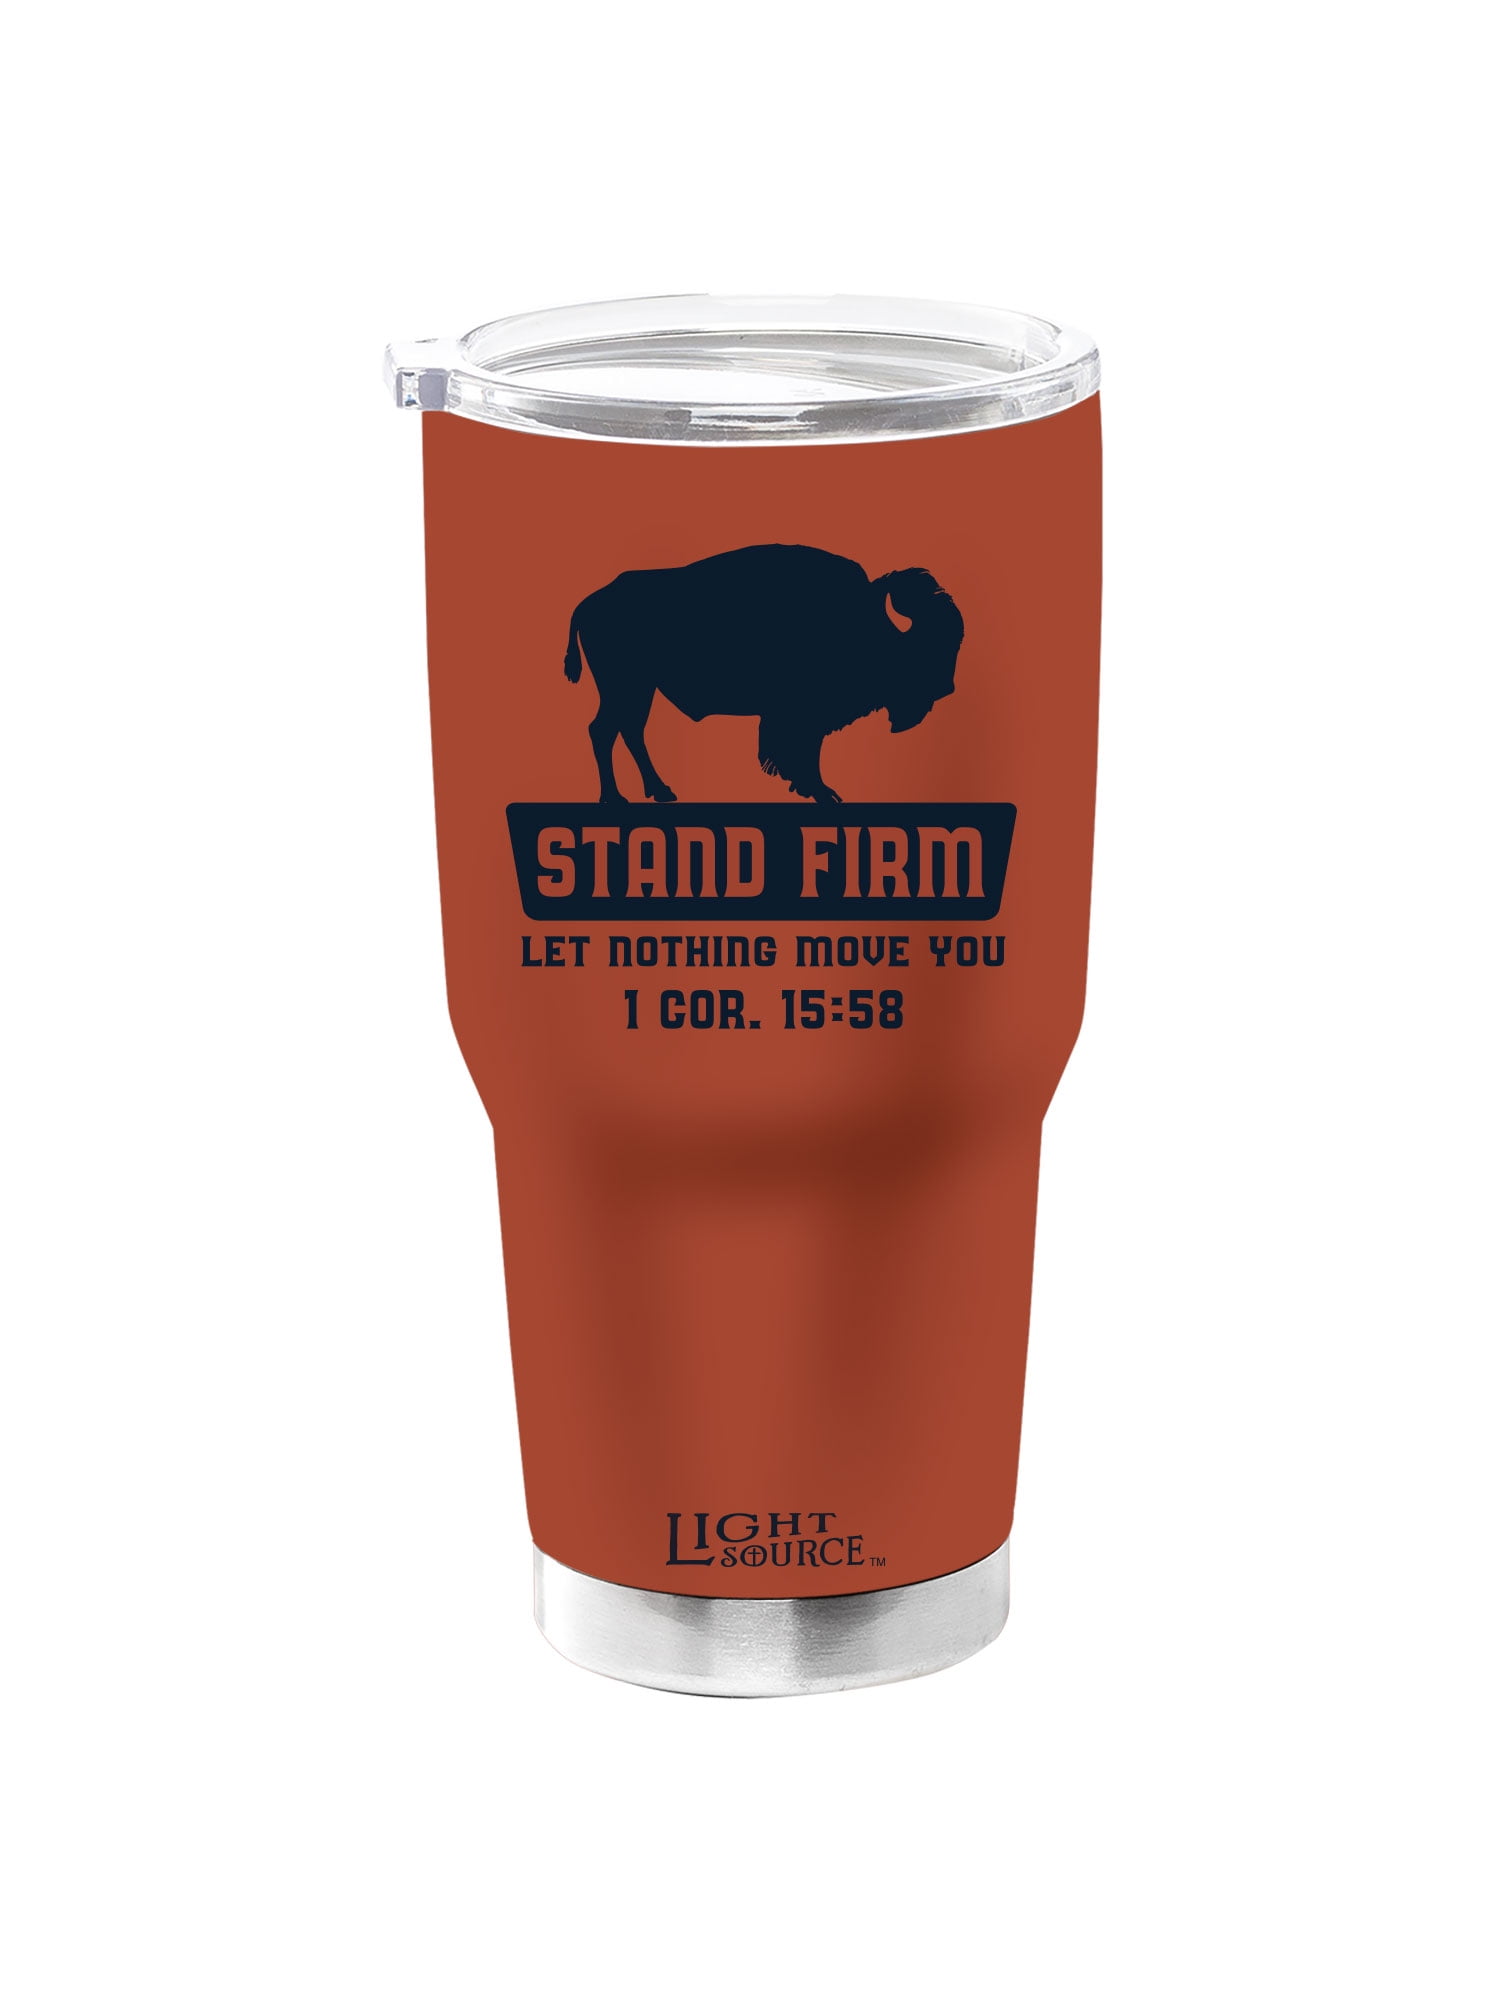 Love It For Less - Wowzers!!! Get TWO 14oz Stanley Tumblers for $30!!!  Choose from 3 perfect 🤩 colors!!!! Just add 2 from the link and discount  will automatically apply at checkout!! Link dropped below 👇